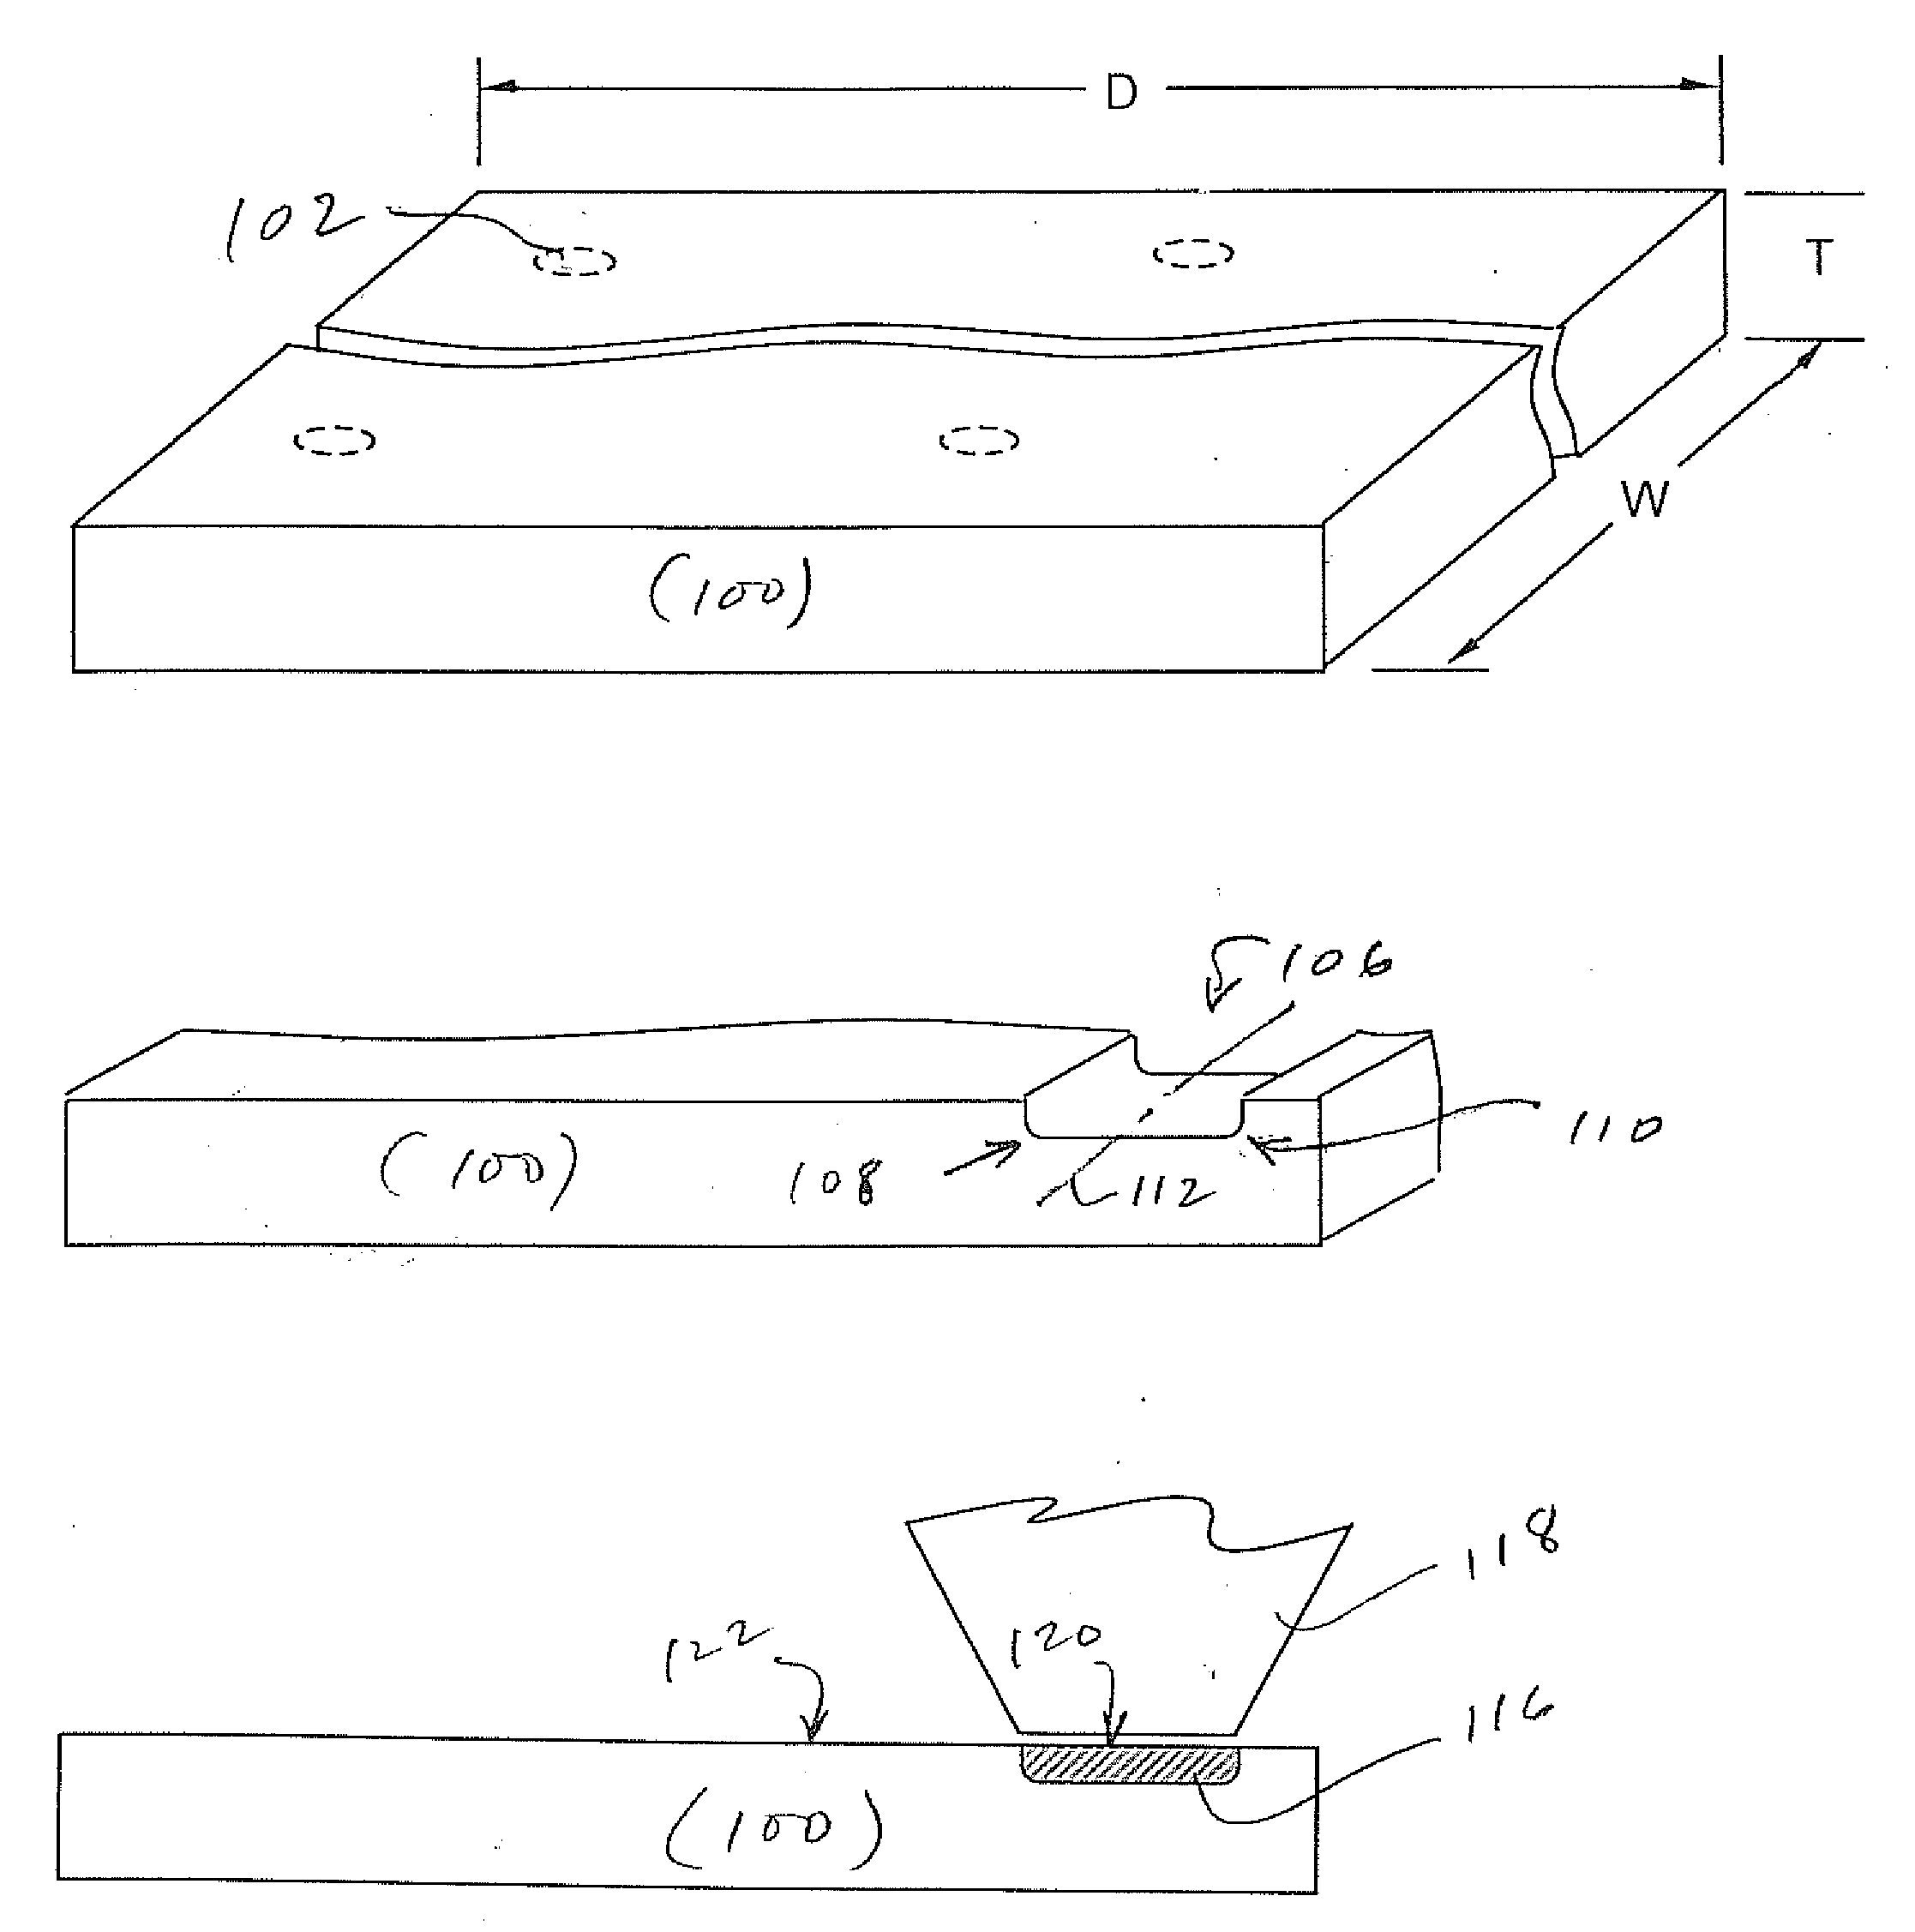 Method of manufacturing of cutting knives using direct metal deposition